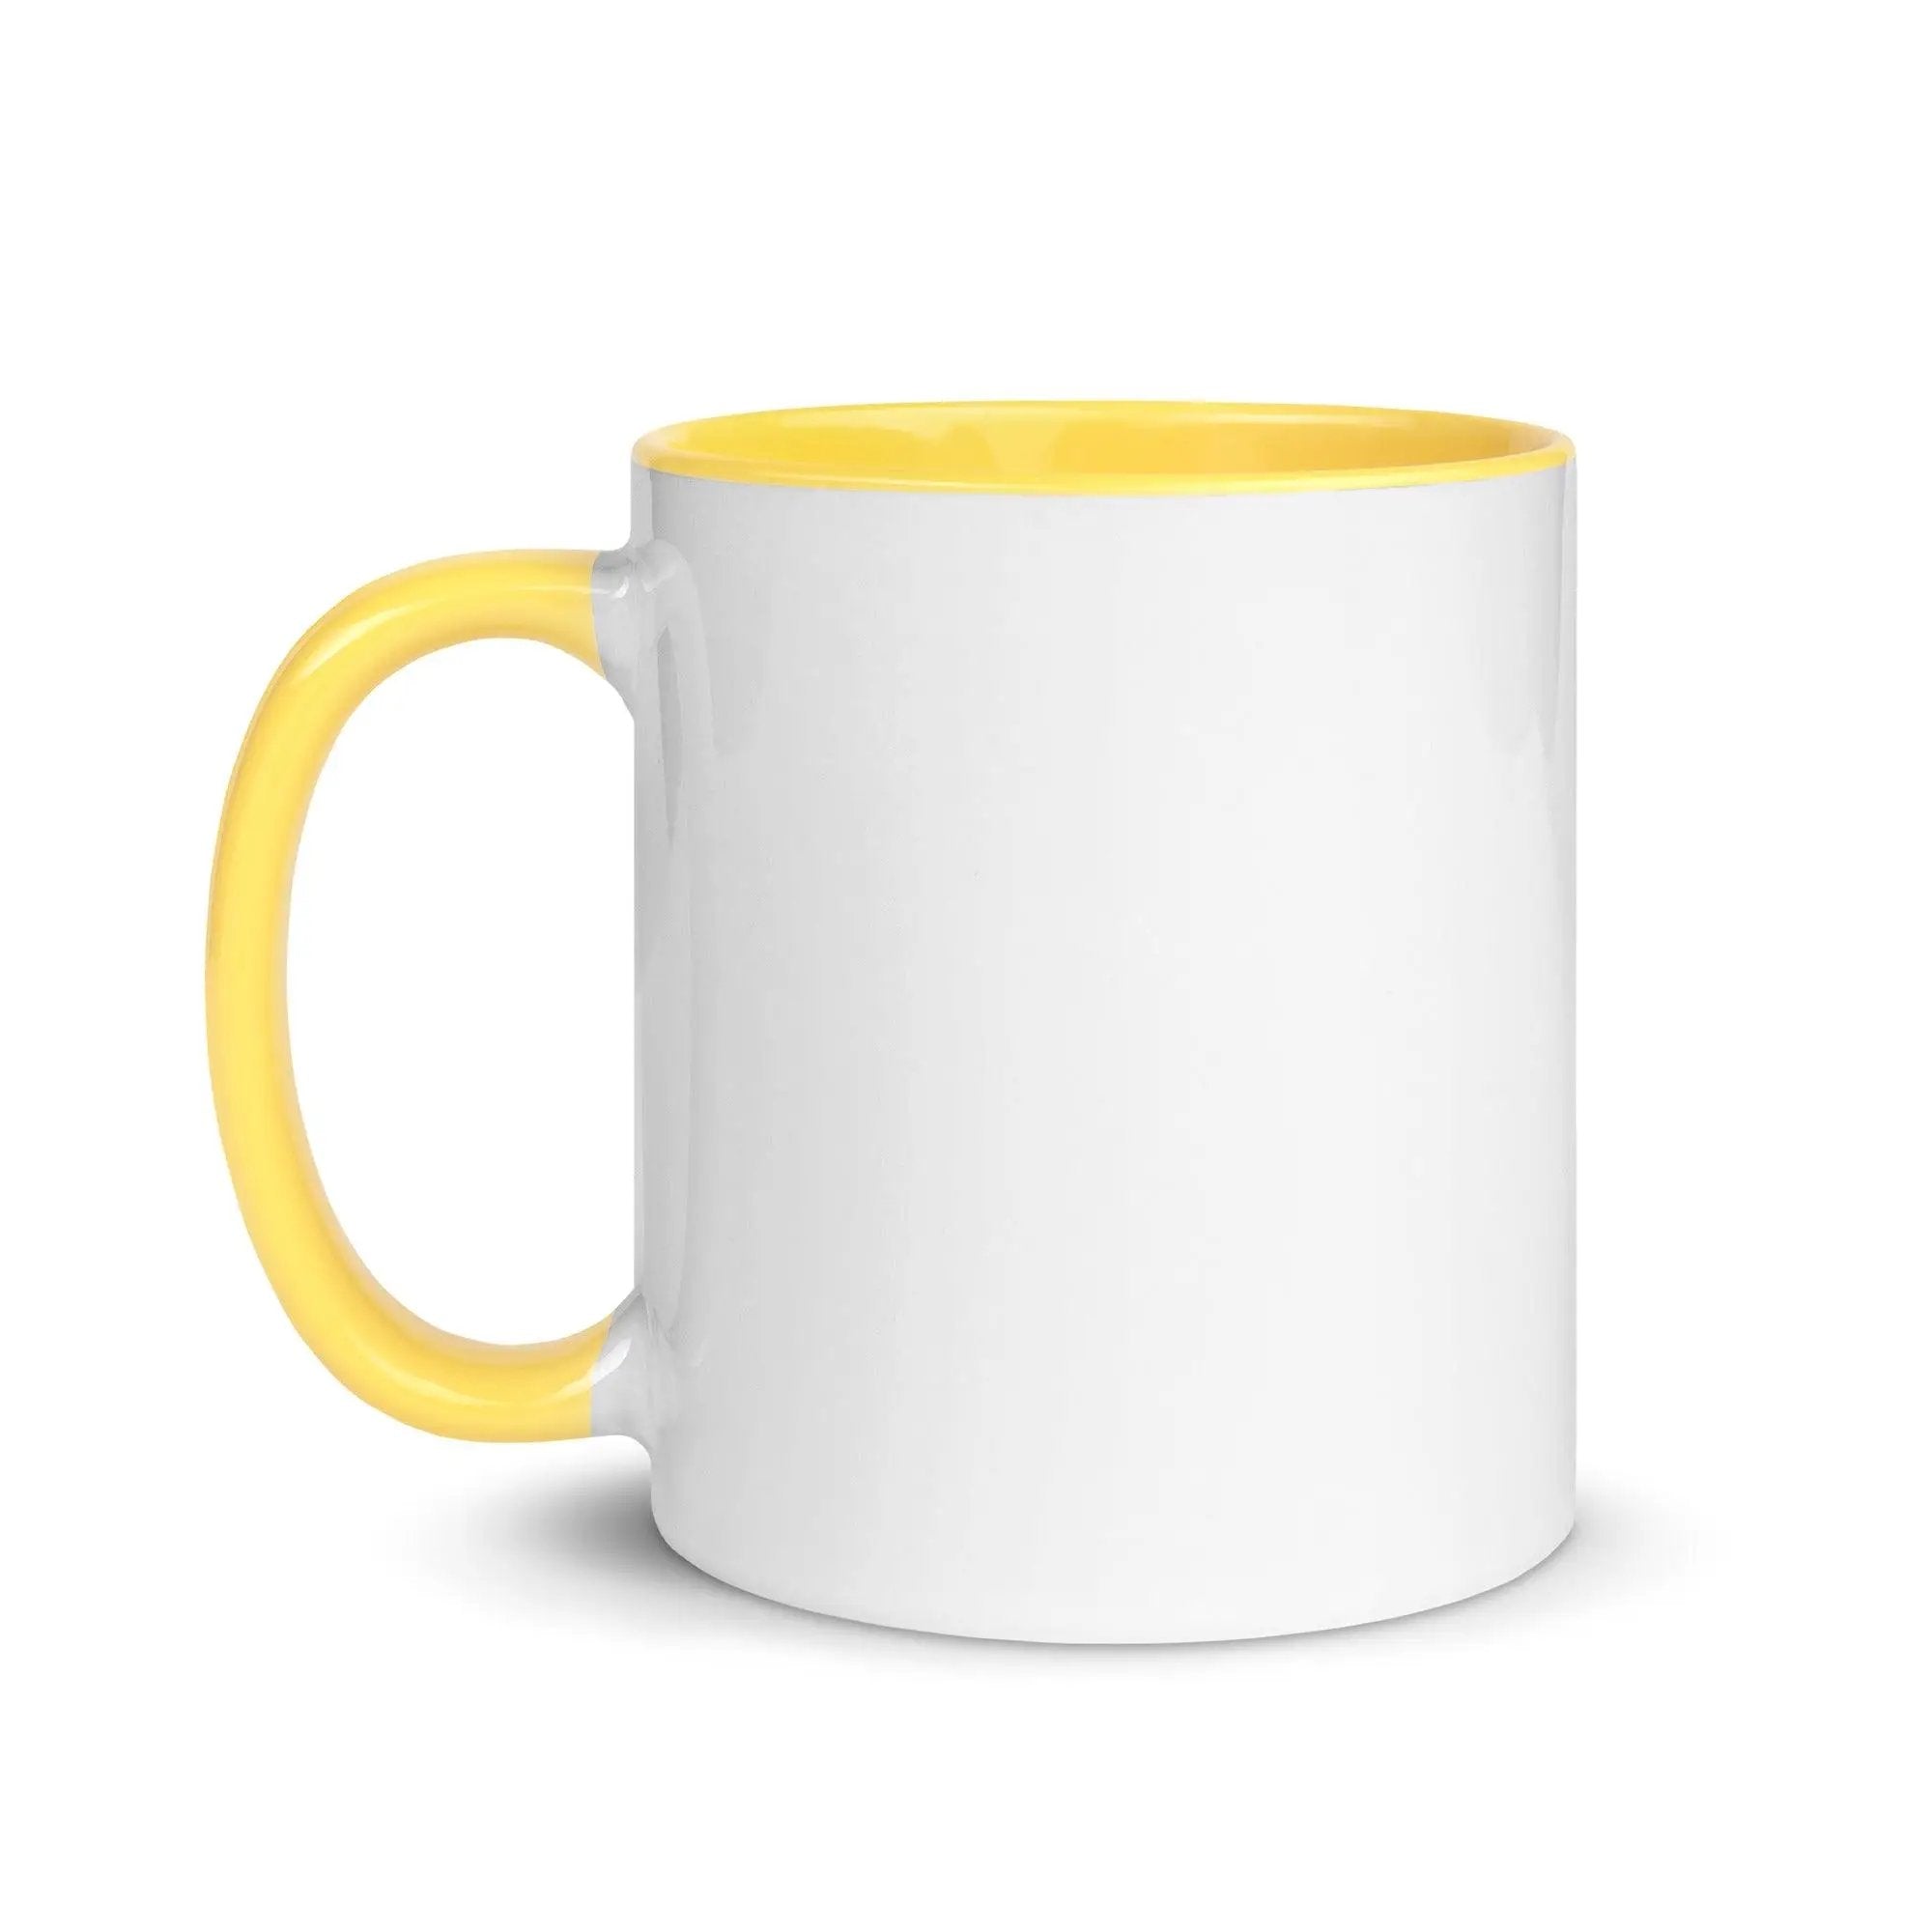 Activate! Mug with Color Inside